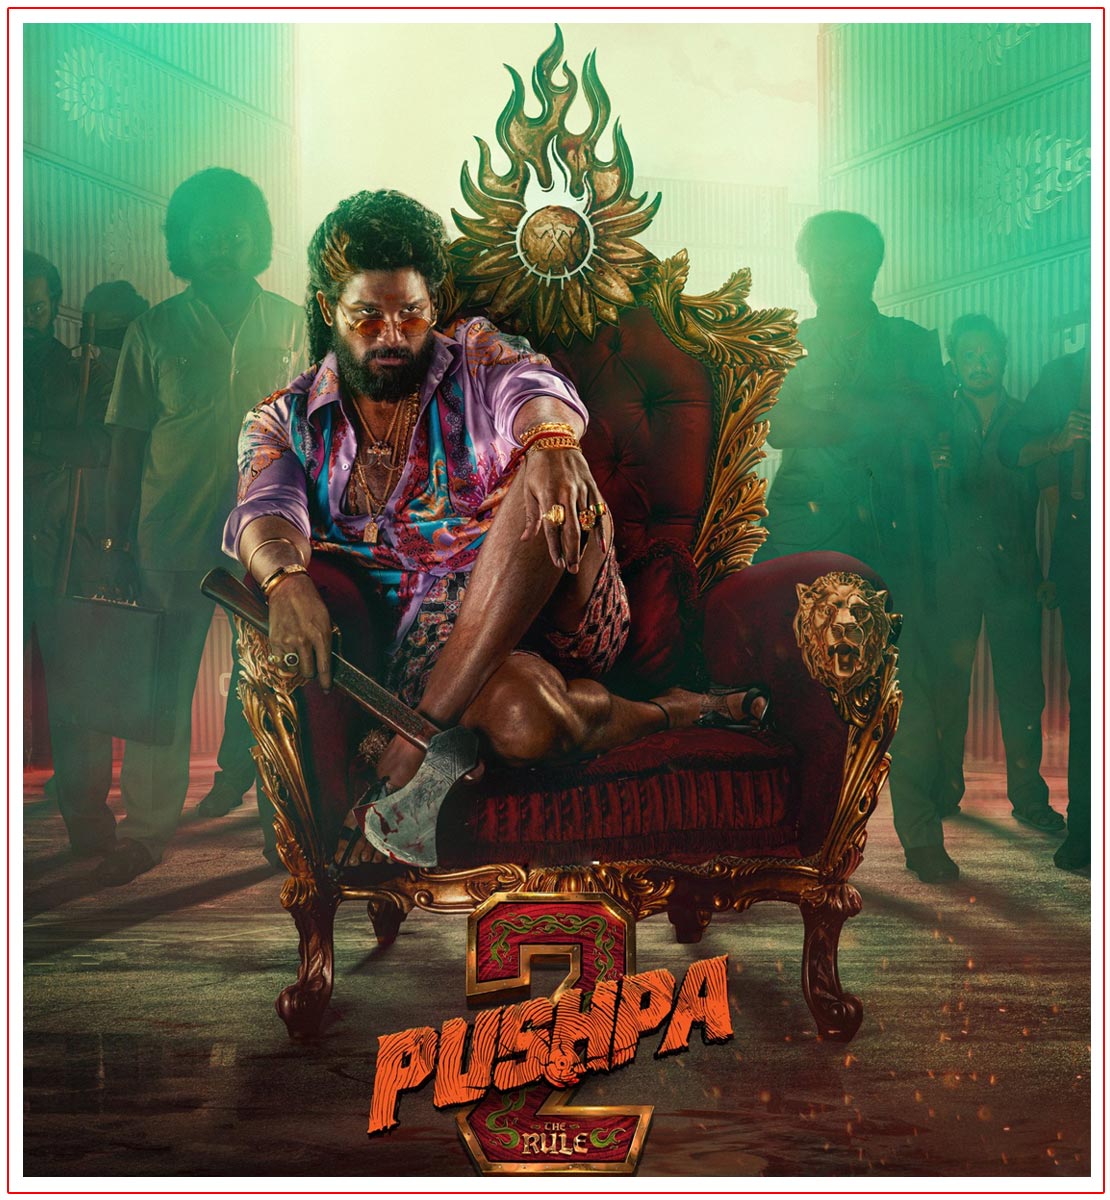 Pushpa The Rule second single getting ready